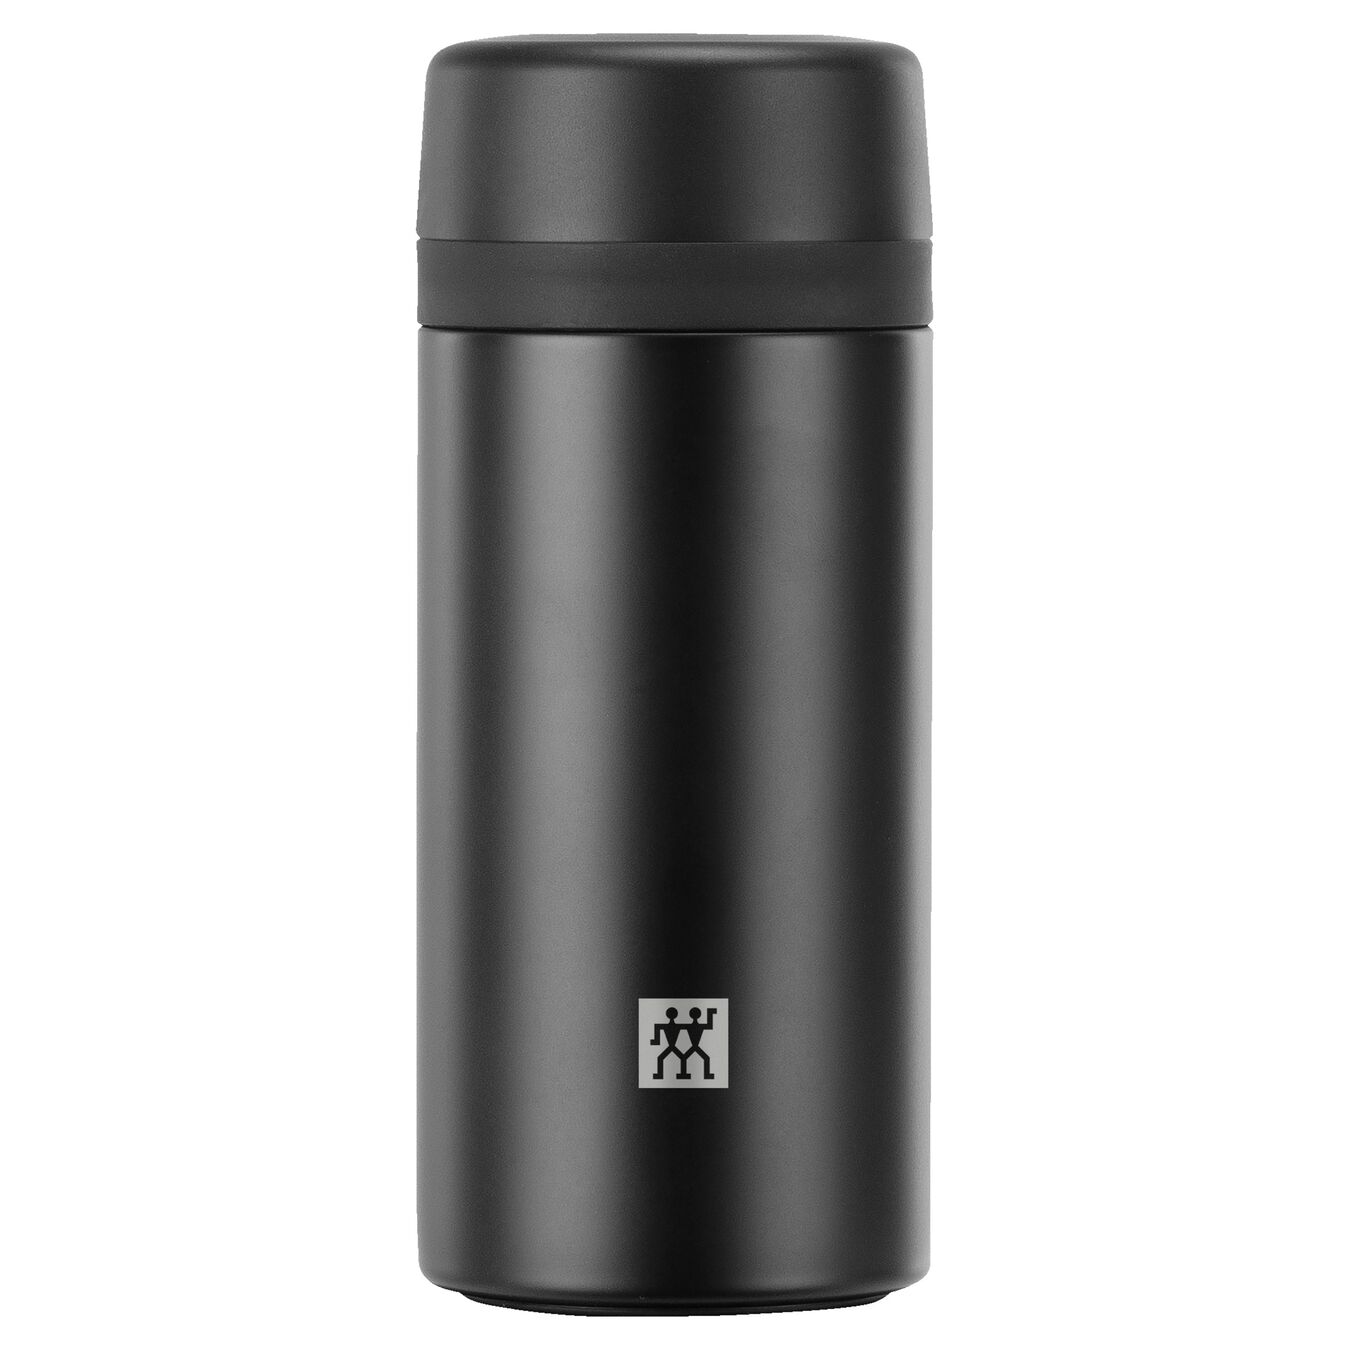 420 ml Thermo flask black,,large 1